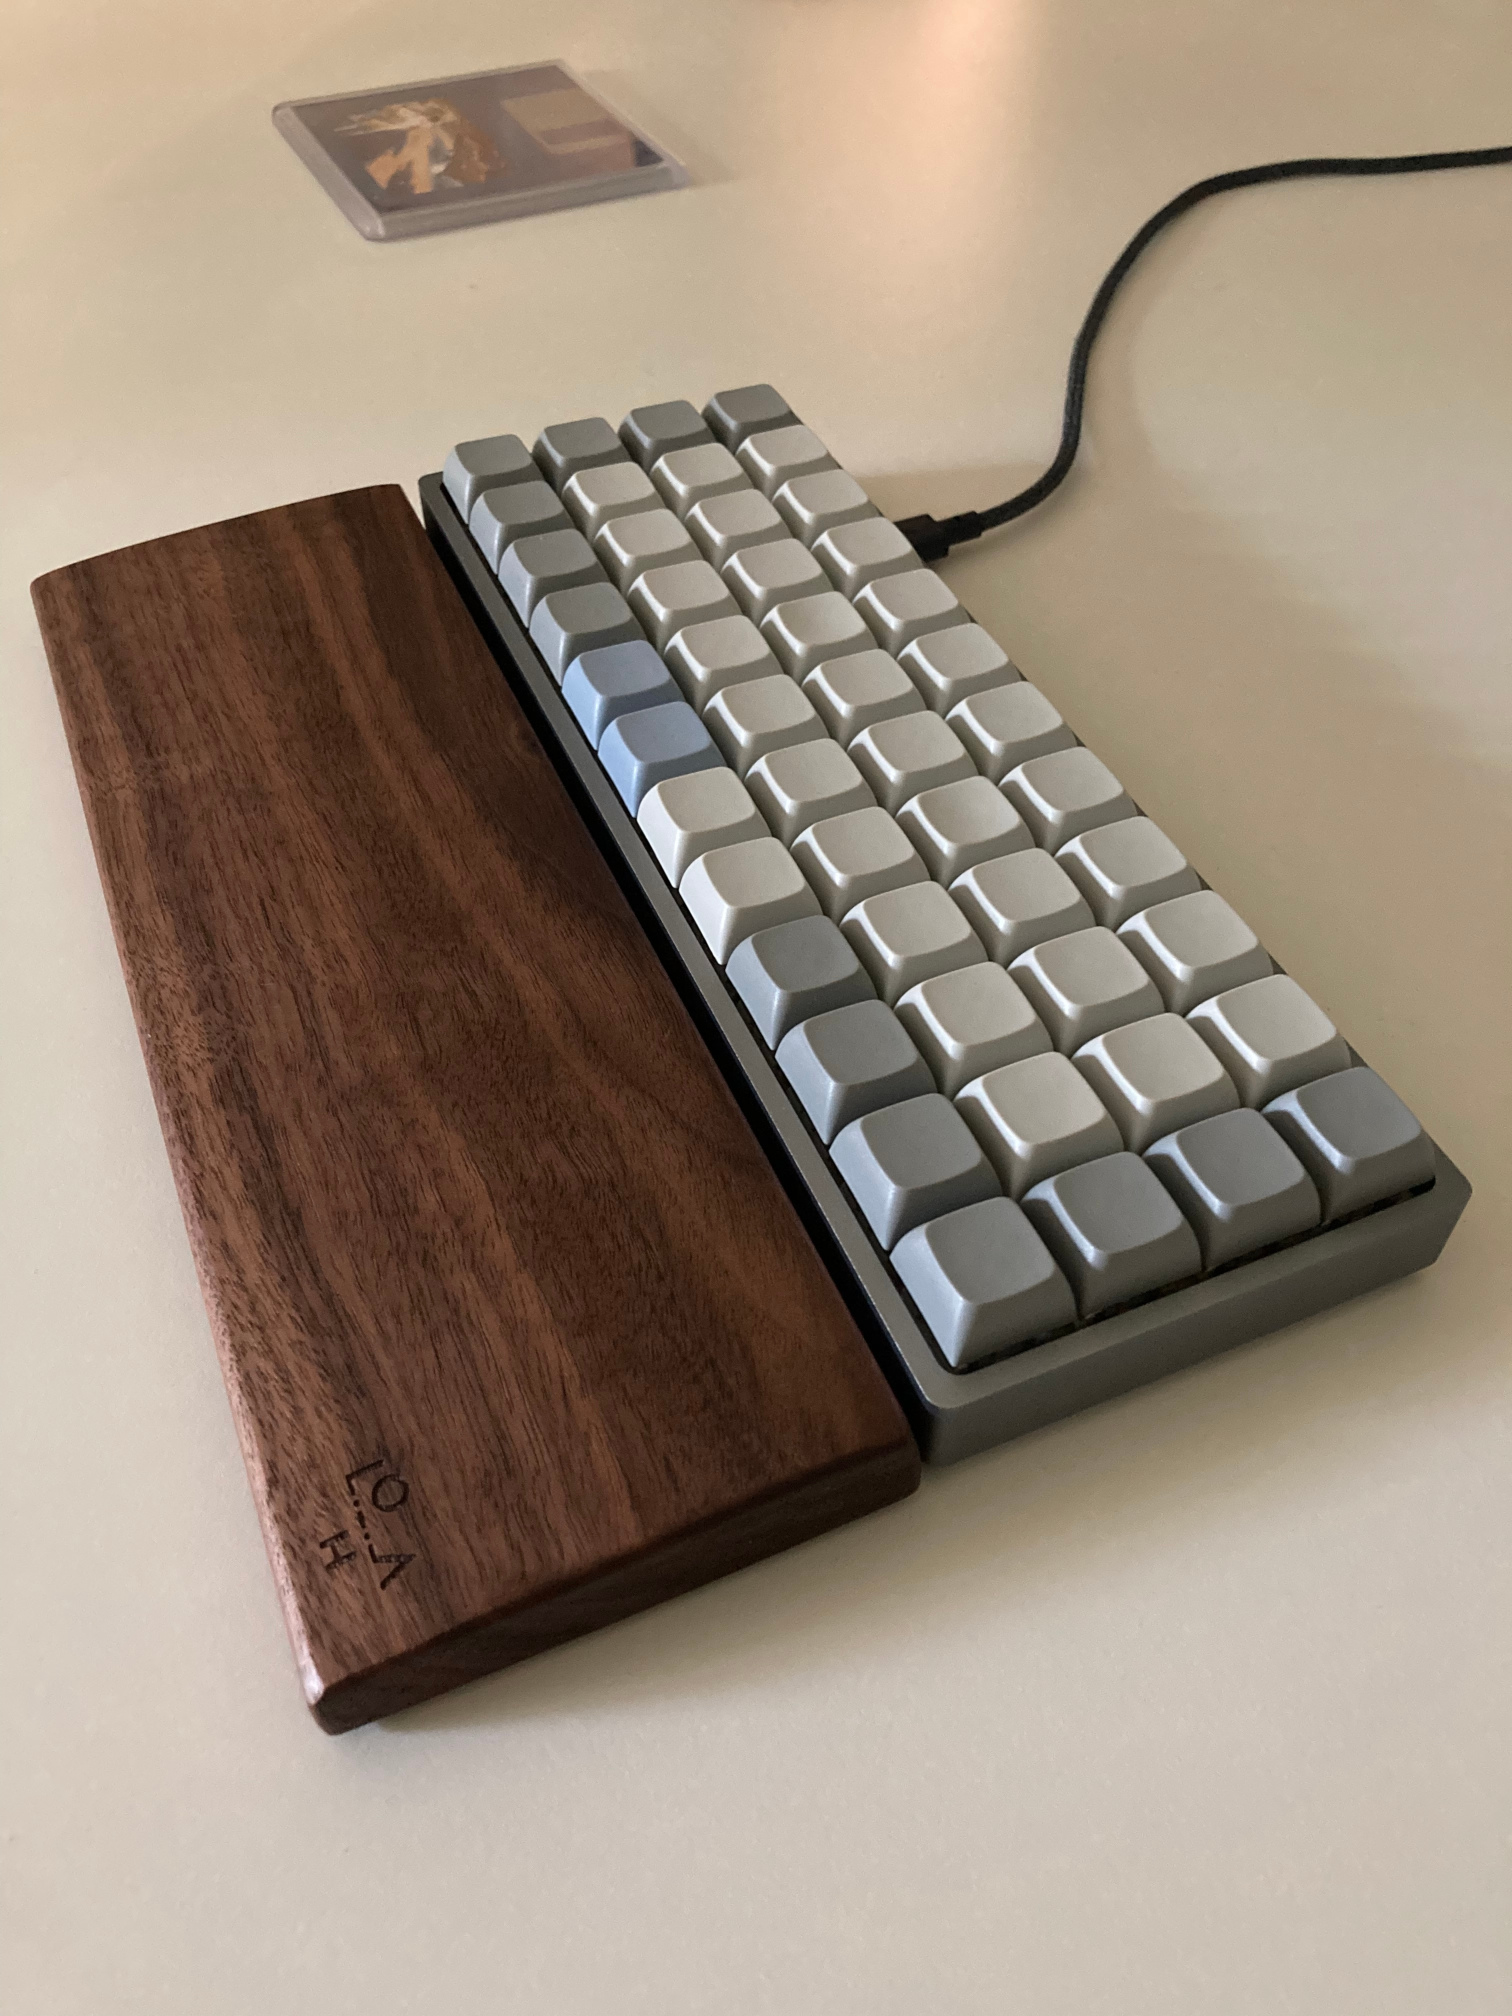 Picture of my Planck with blank XDA keycaps and wooded wrist rest.